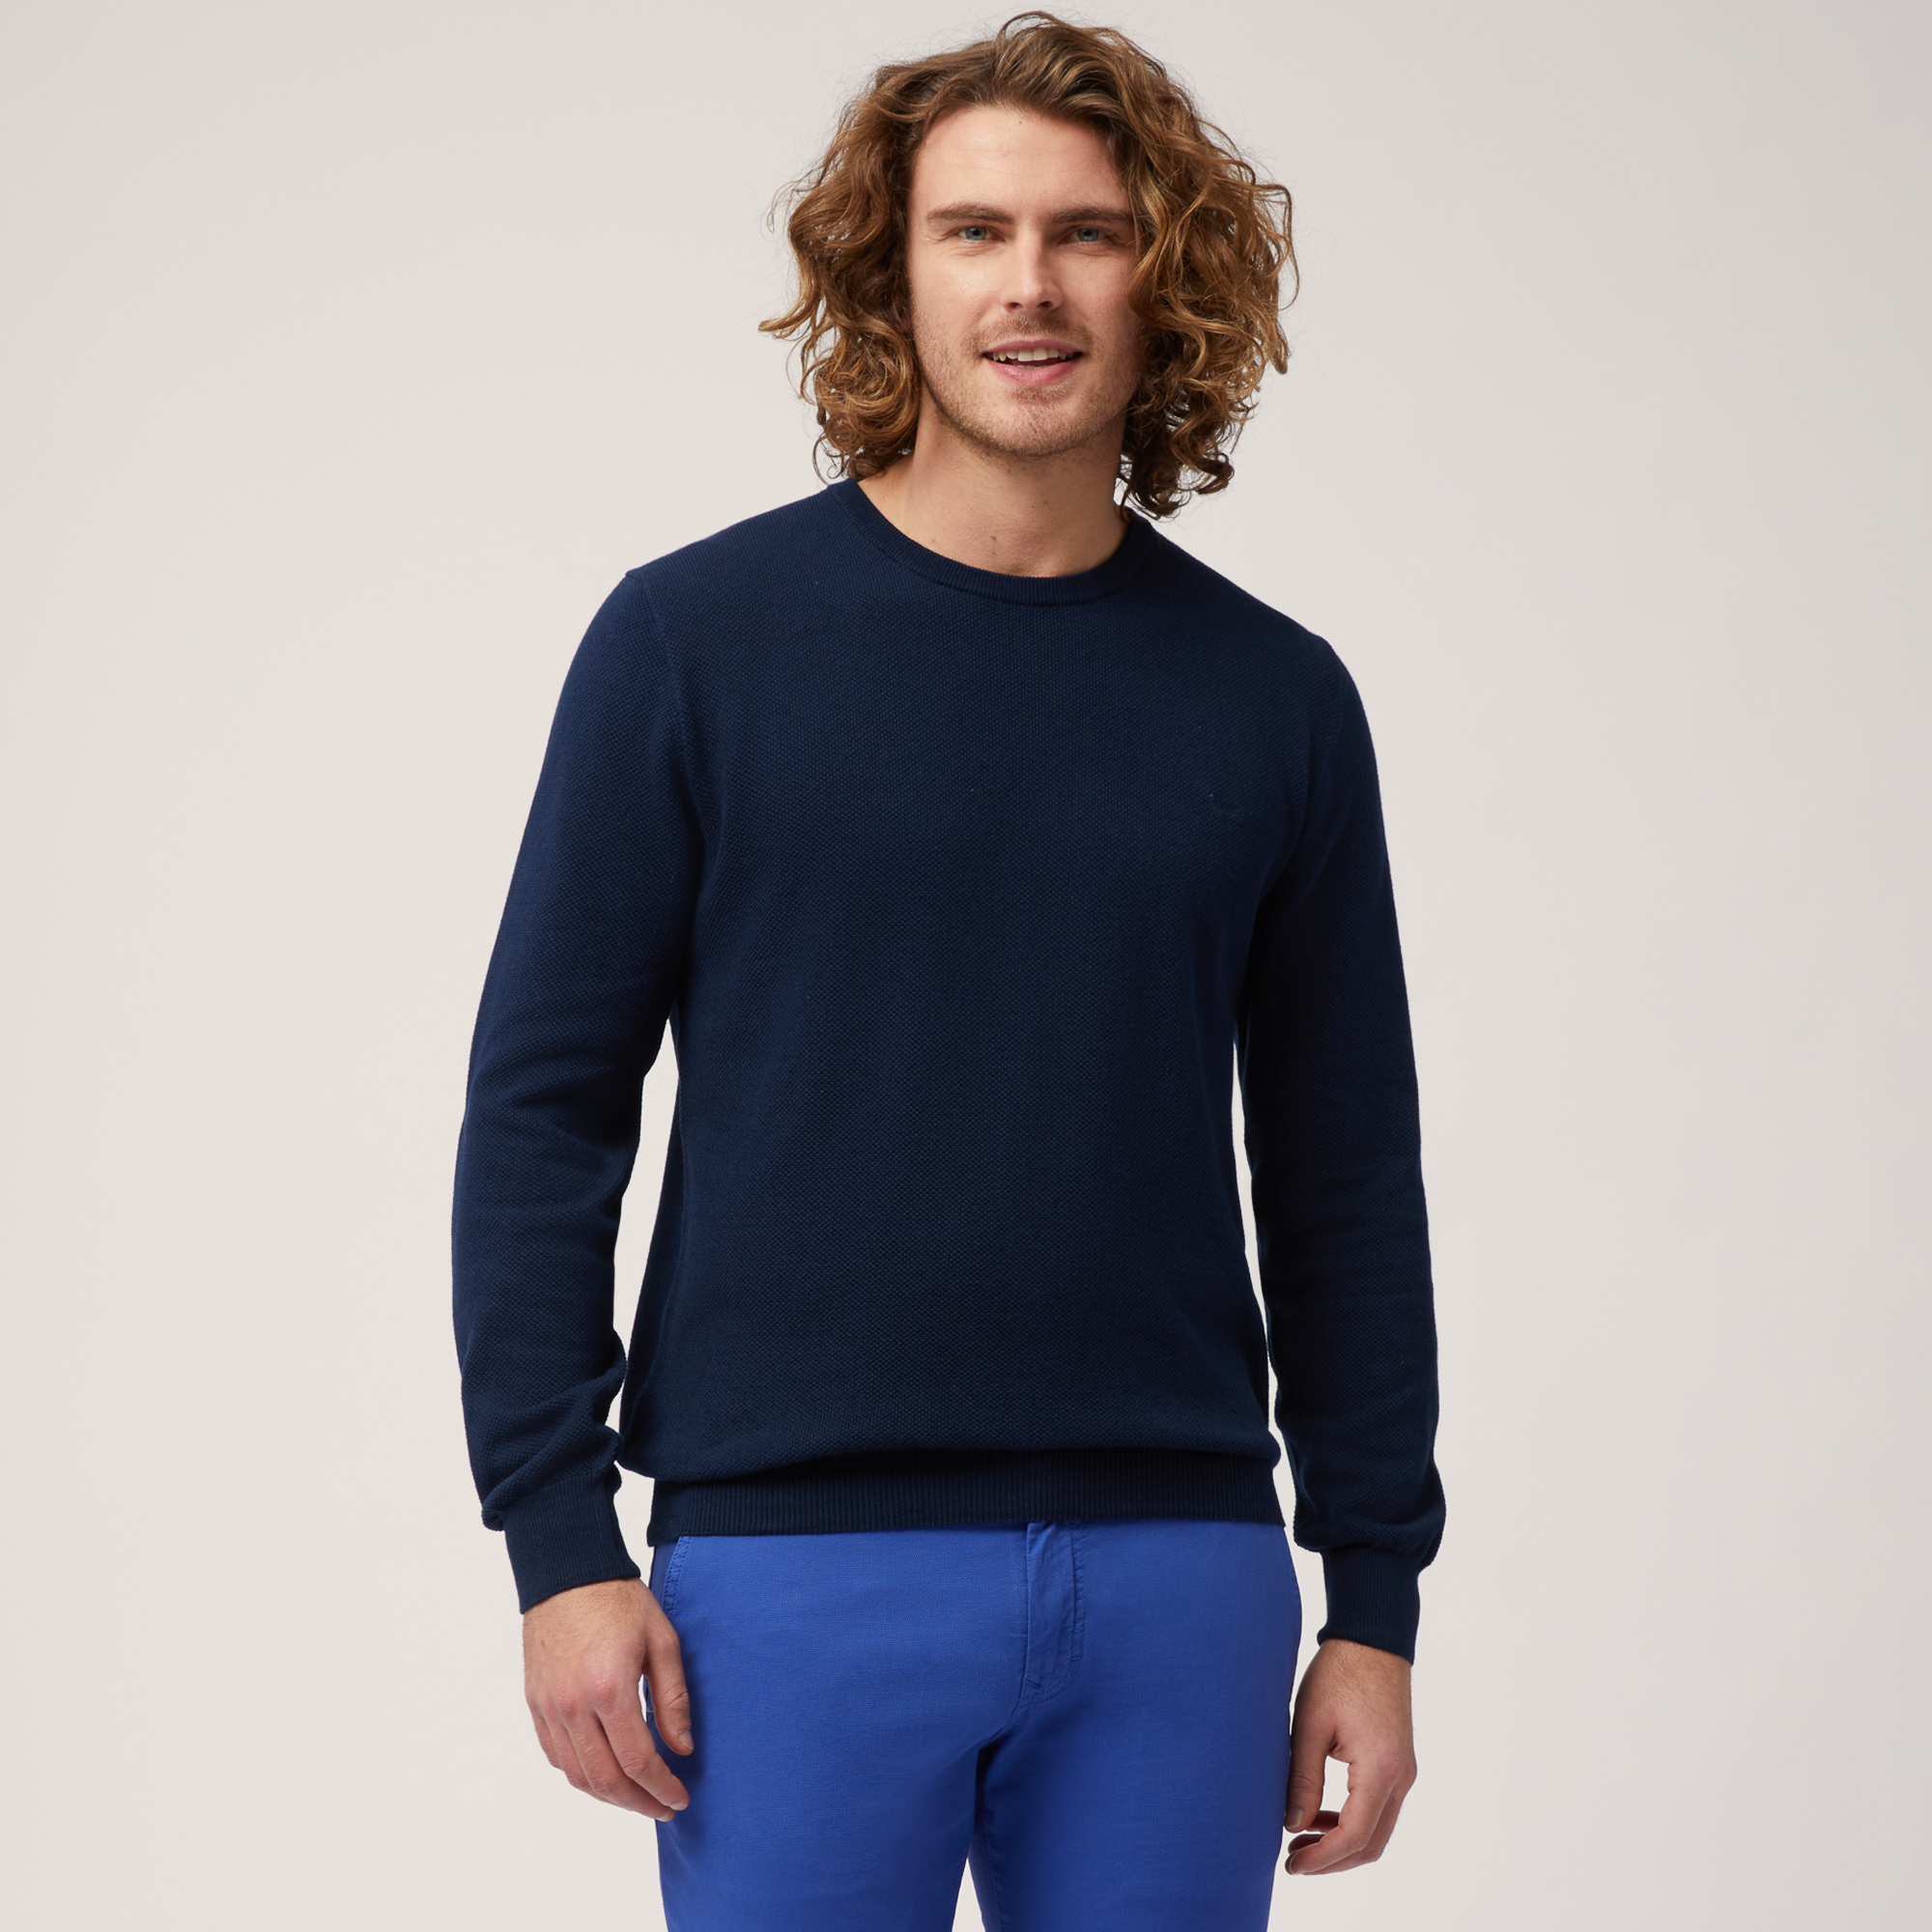 Pullover Girocollo Effetto 3D, Blu Notte, large image number 0